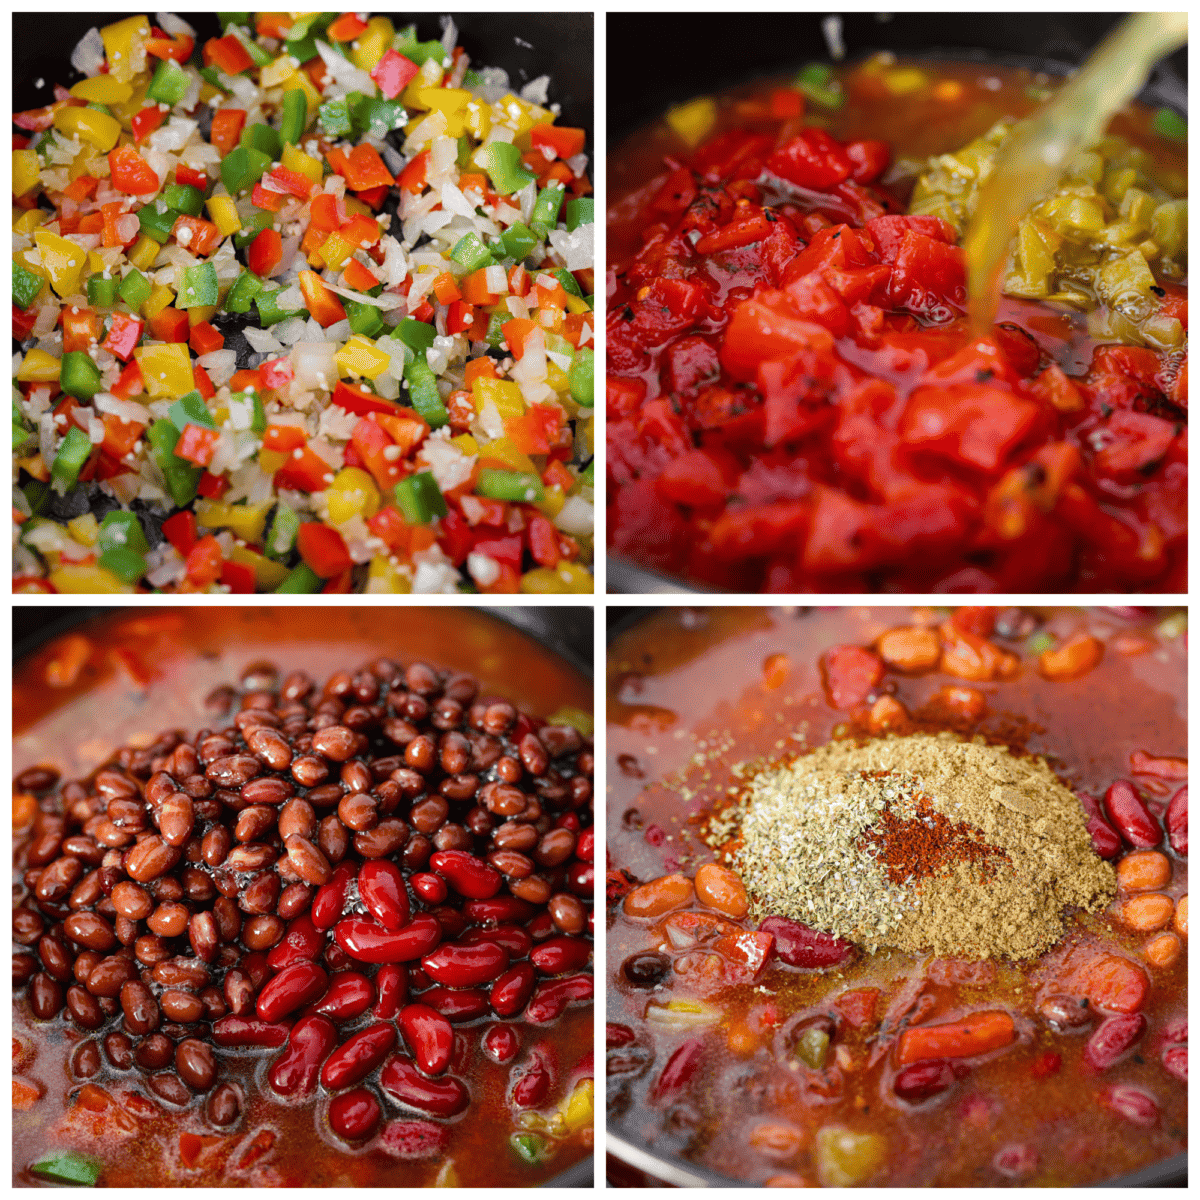 First photo of peppers and onions cooking in a pot. Second photo of the tomatoes, green chilies, and broth added to the pot. Third photo of the beans added to the chili. Fourth photo of the seasonings added to the pot.